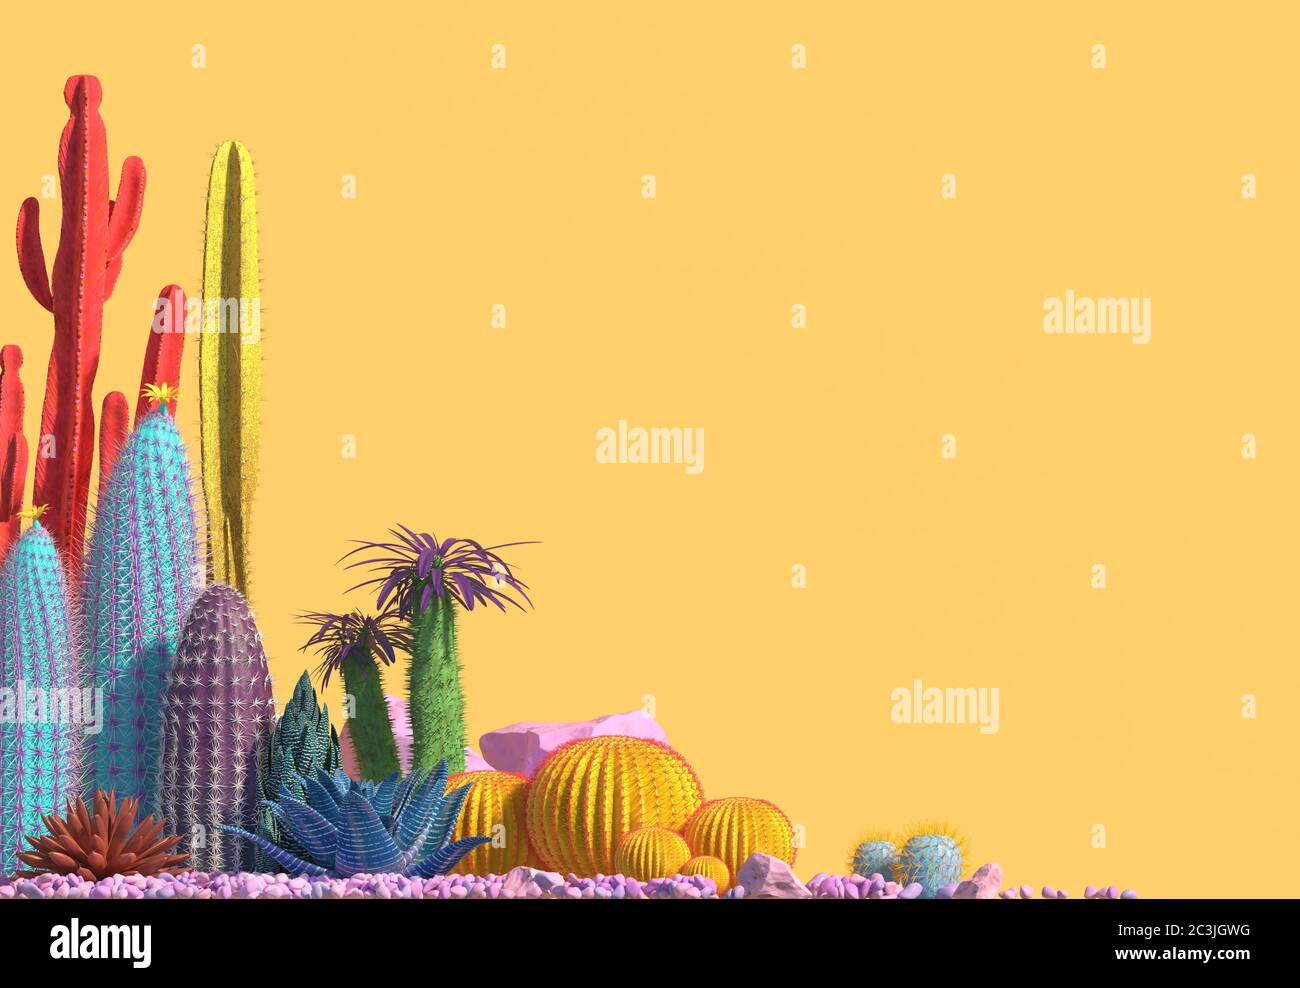 Decorative composition of groups of different species of multicolored cacti on yellow background. Contemporary art. Сopy space. 3D rendering. Stock Photo